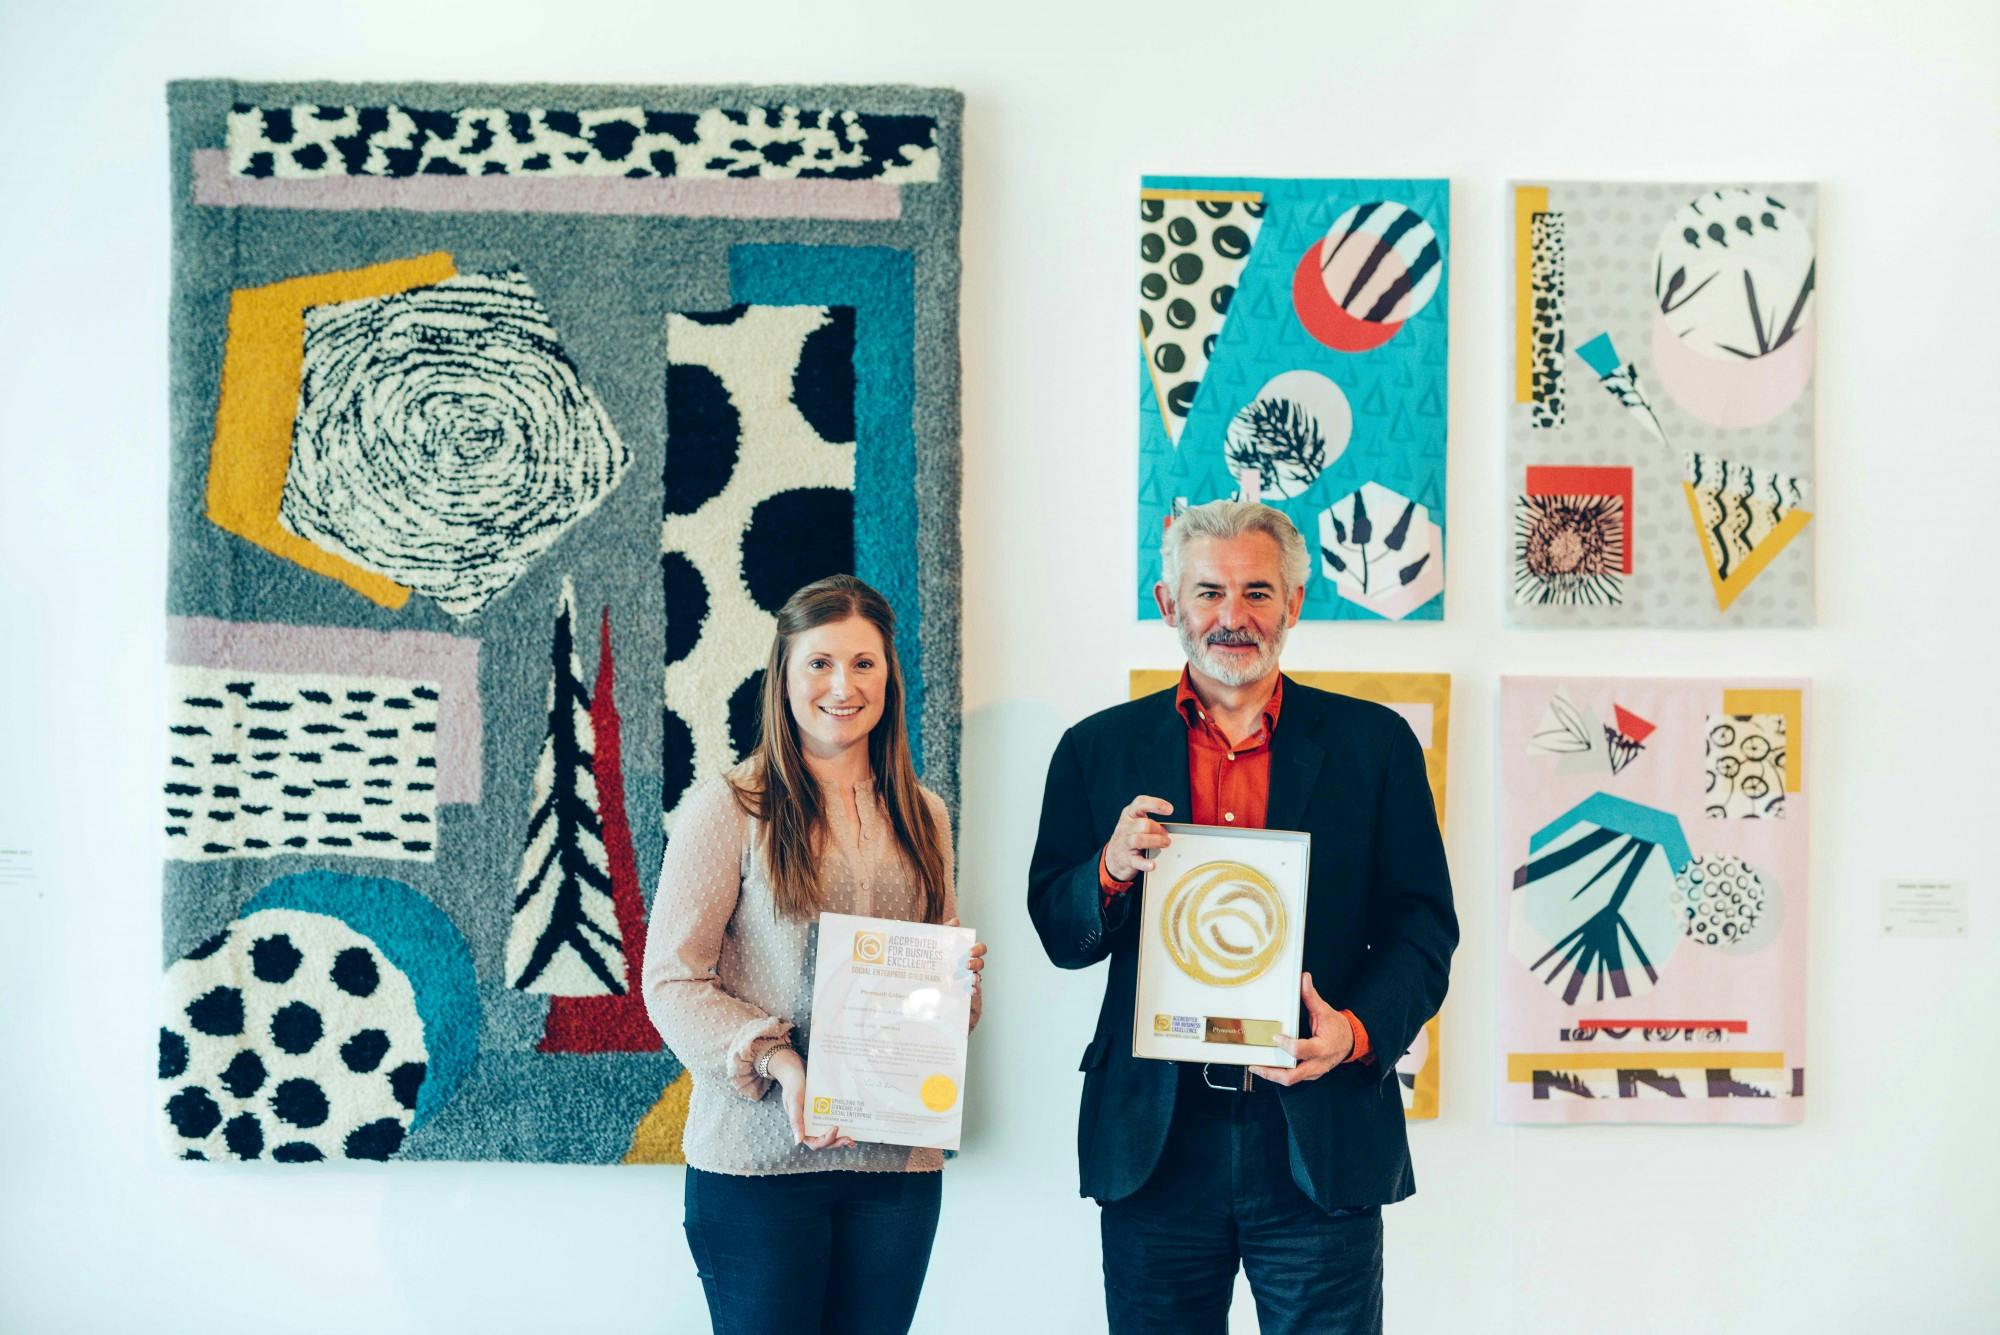 Hannah Harris Director of Development and Professor Andrew Brewerton Principal and Chief Executive of Plymouth College of Art with the Social Enterprise Gold Mark award